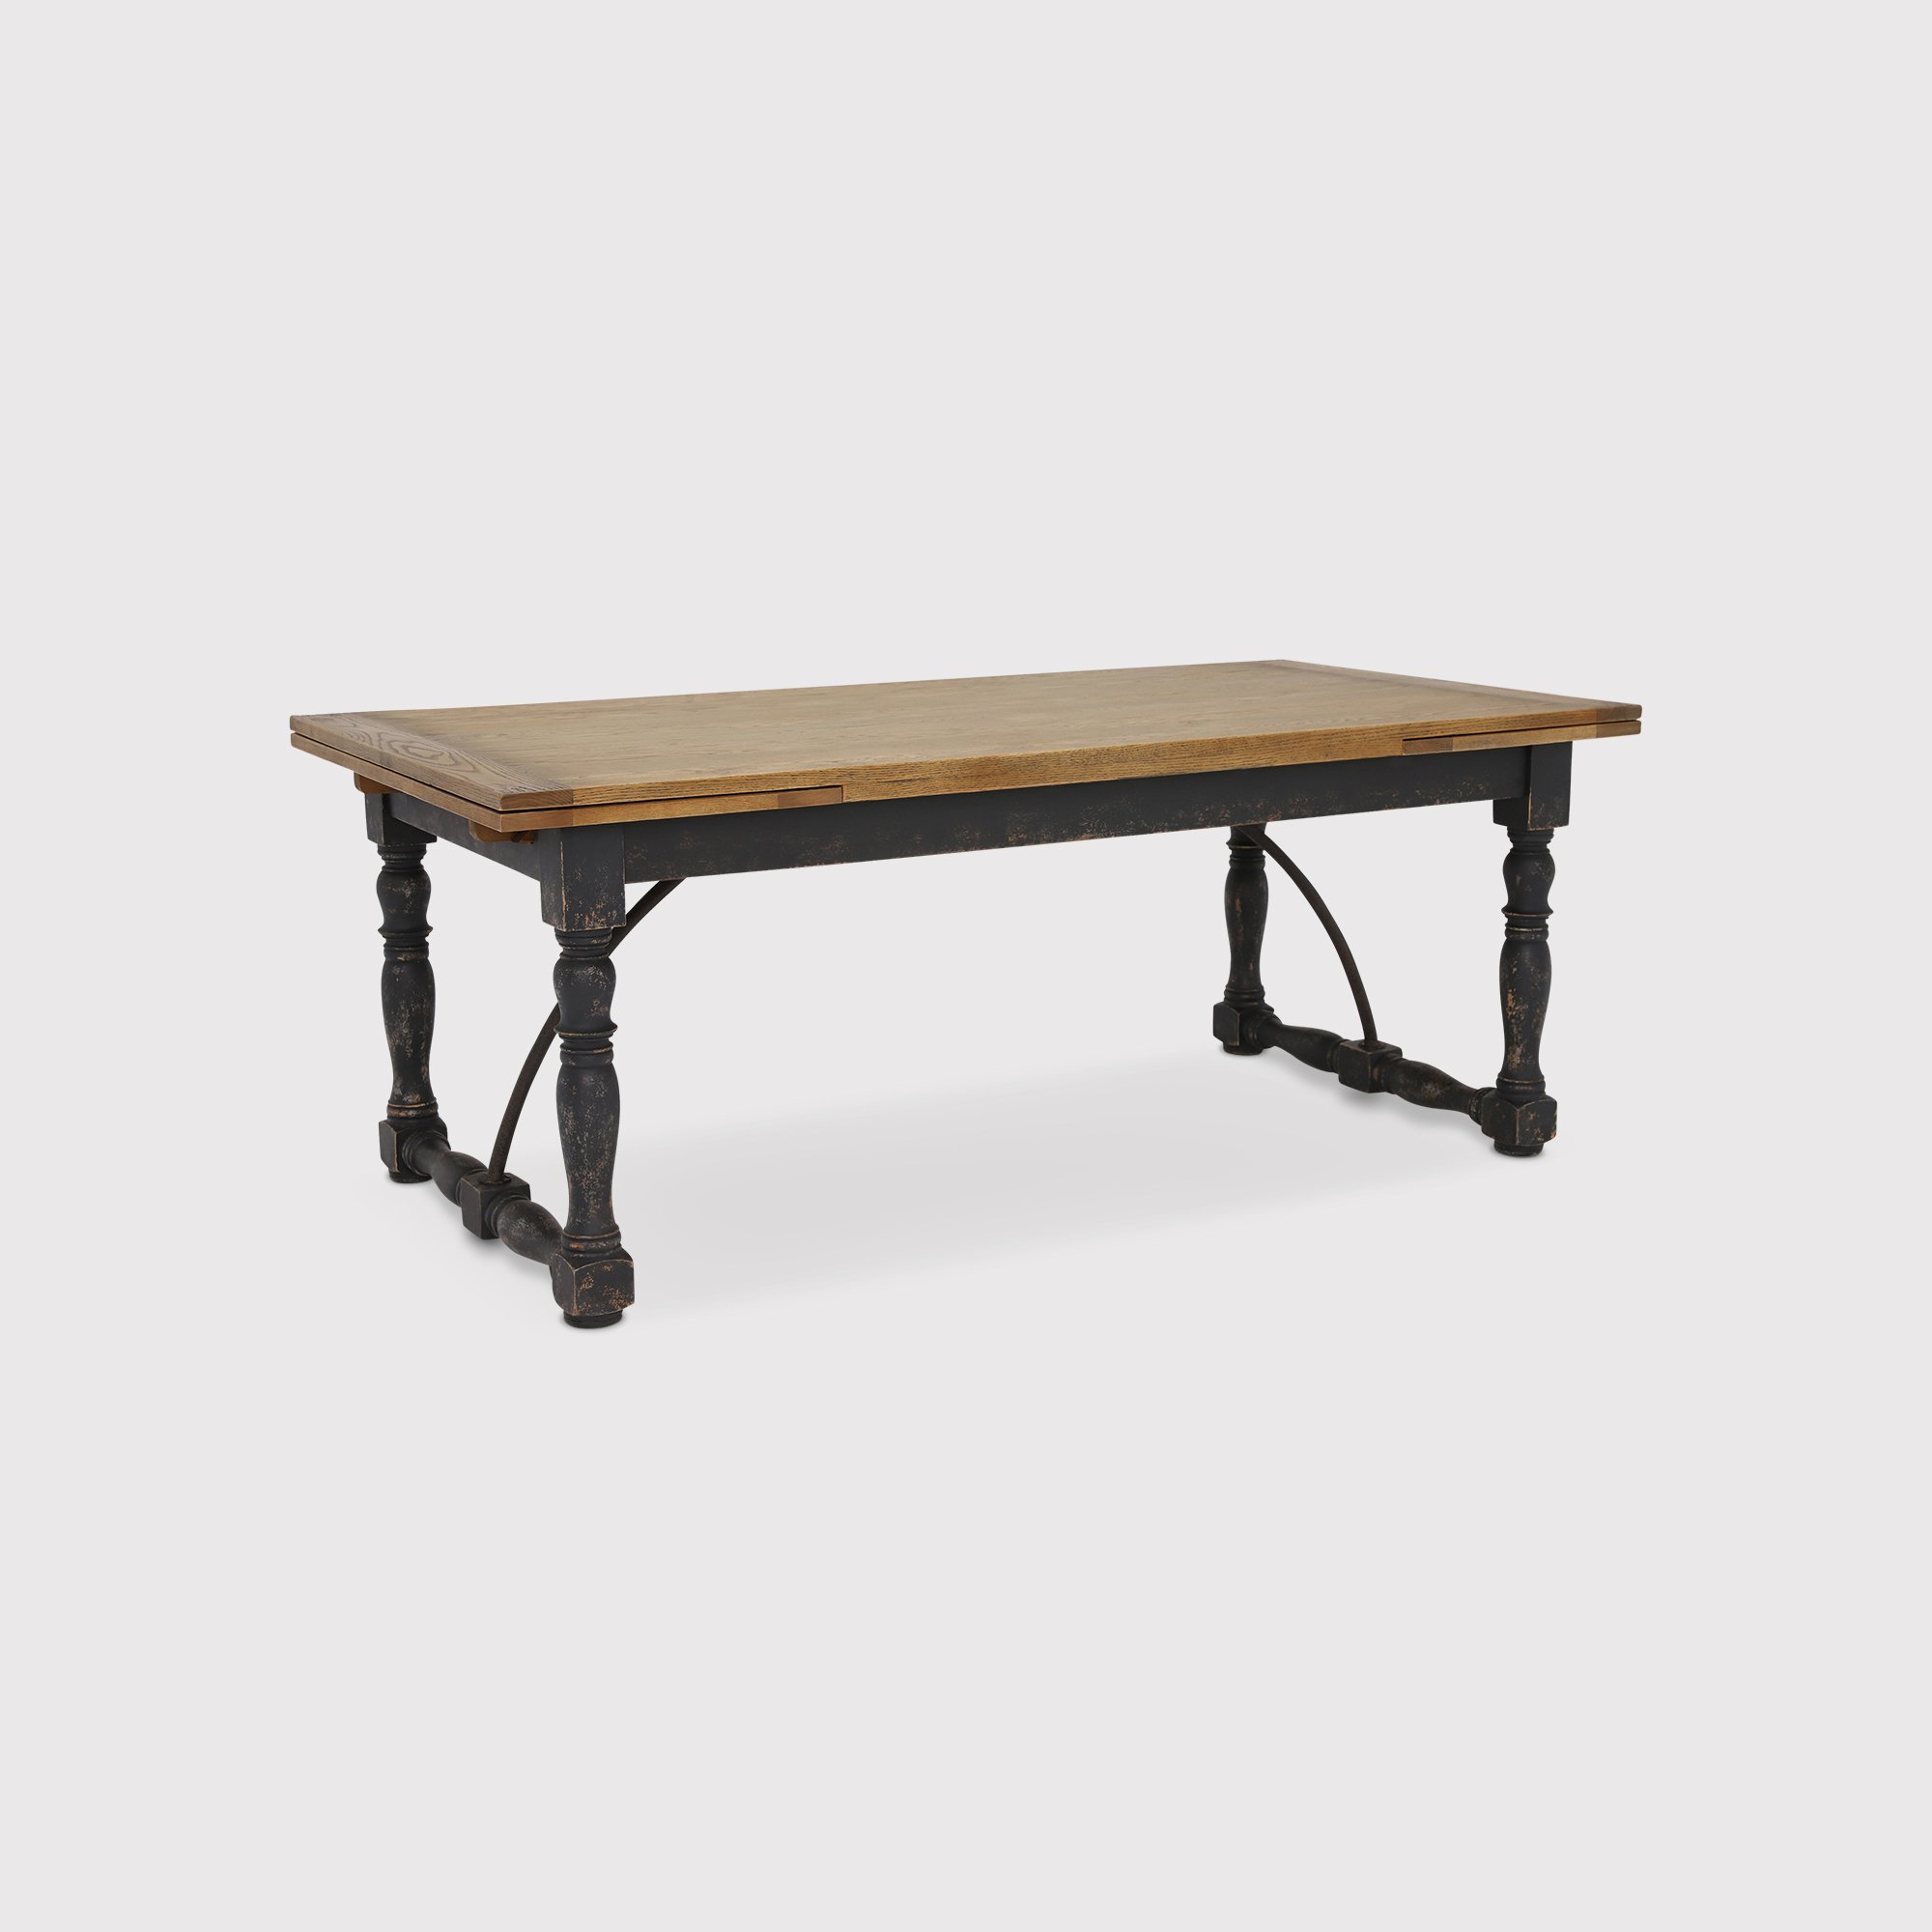 Keeler Dining Table with Two Leaves 200/300x100cm, Brown | Barker & Stonehouse